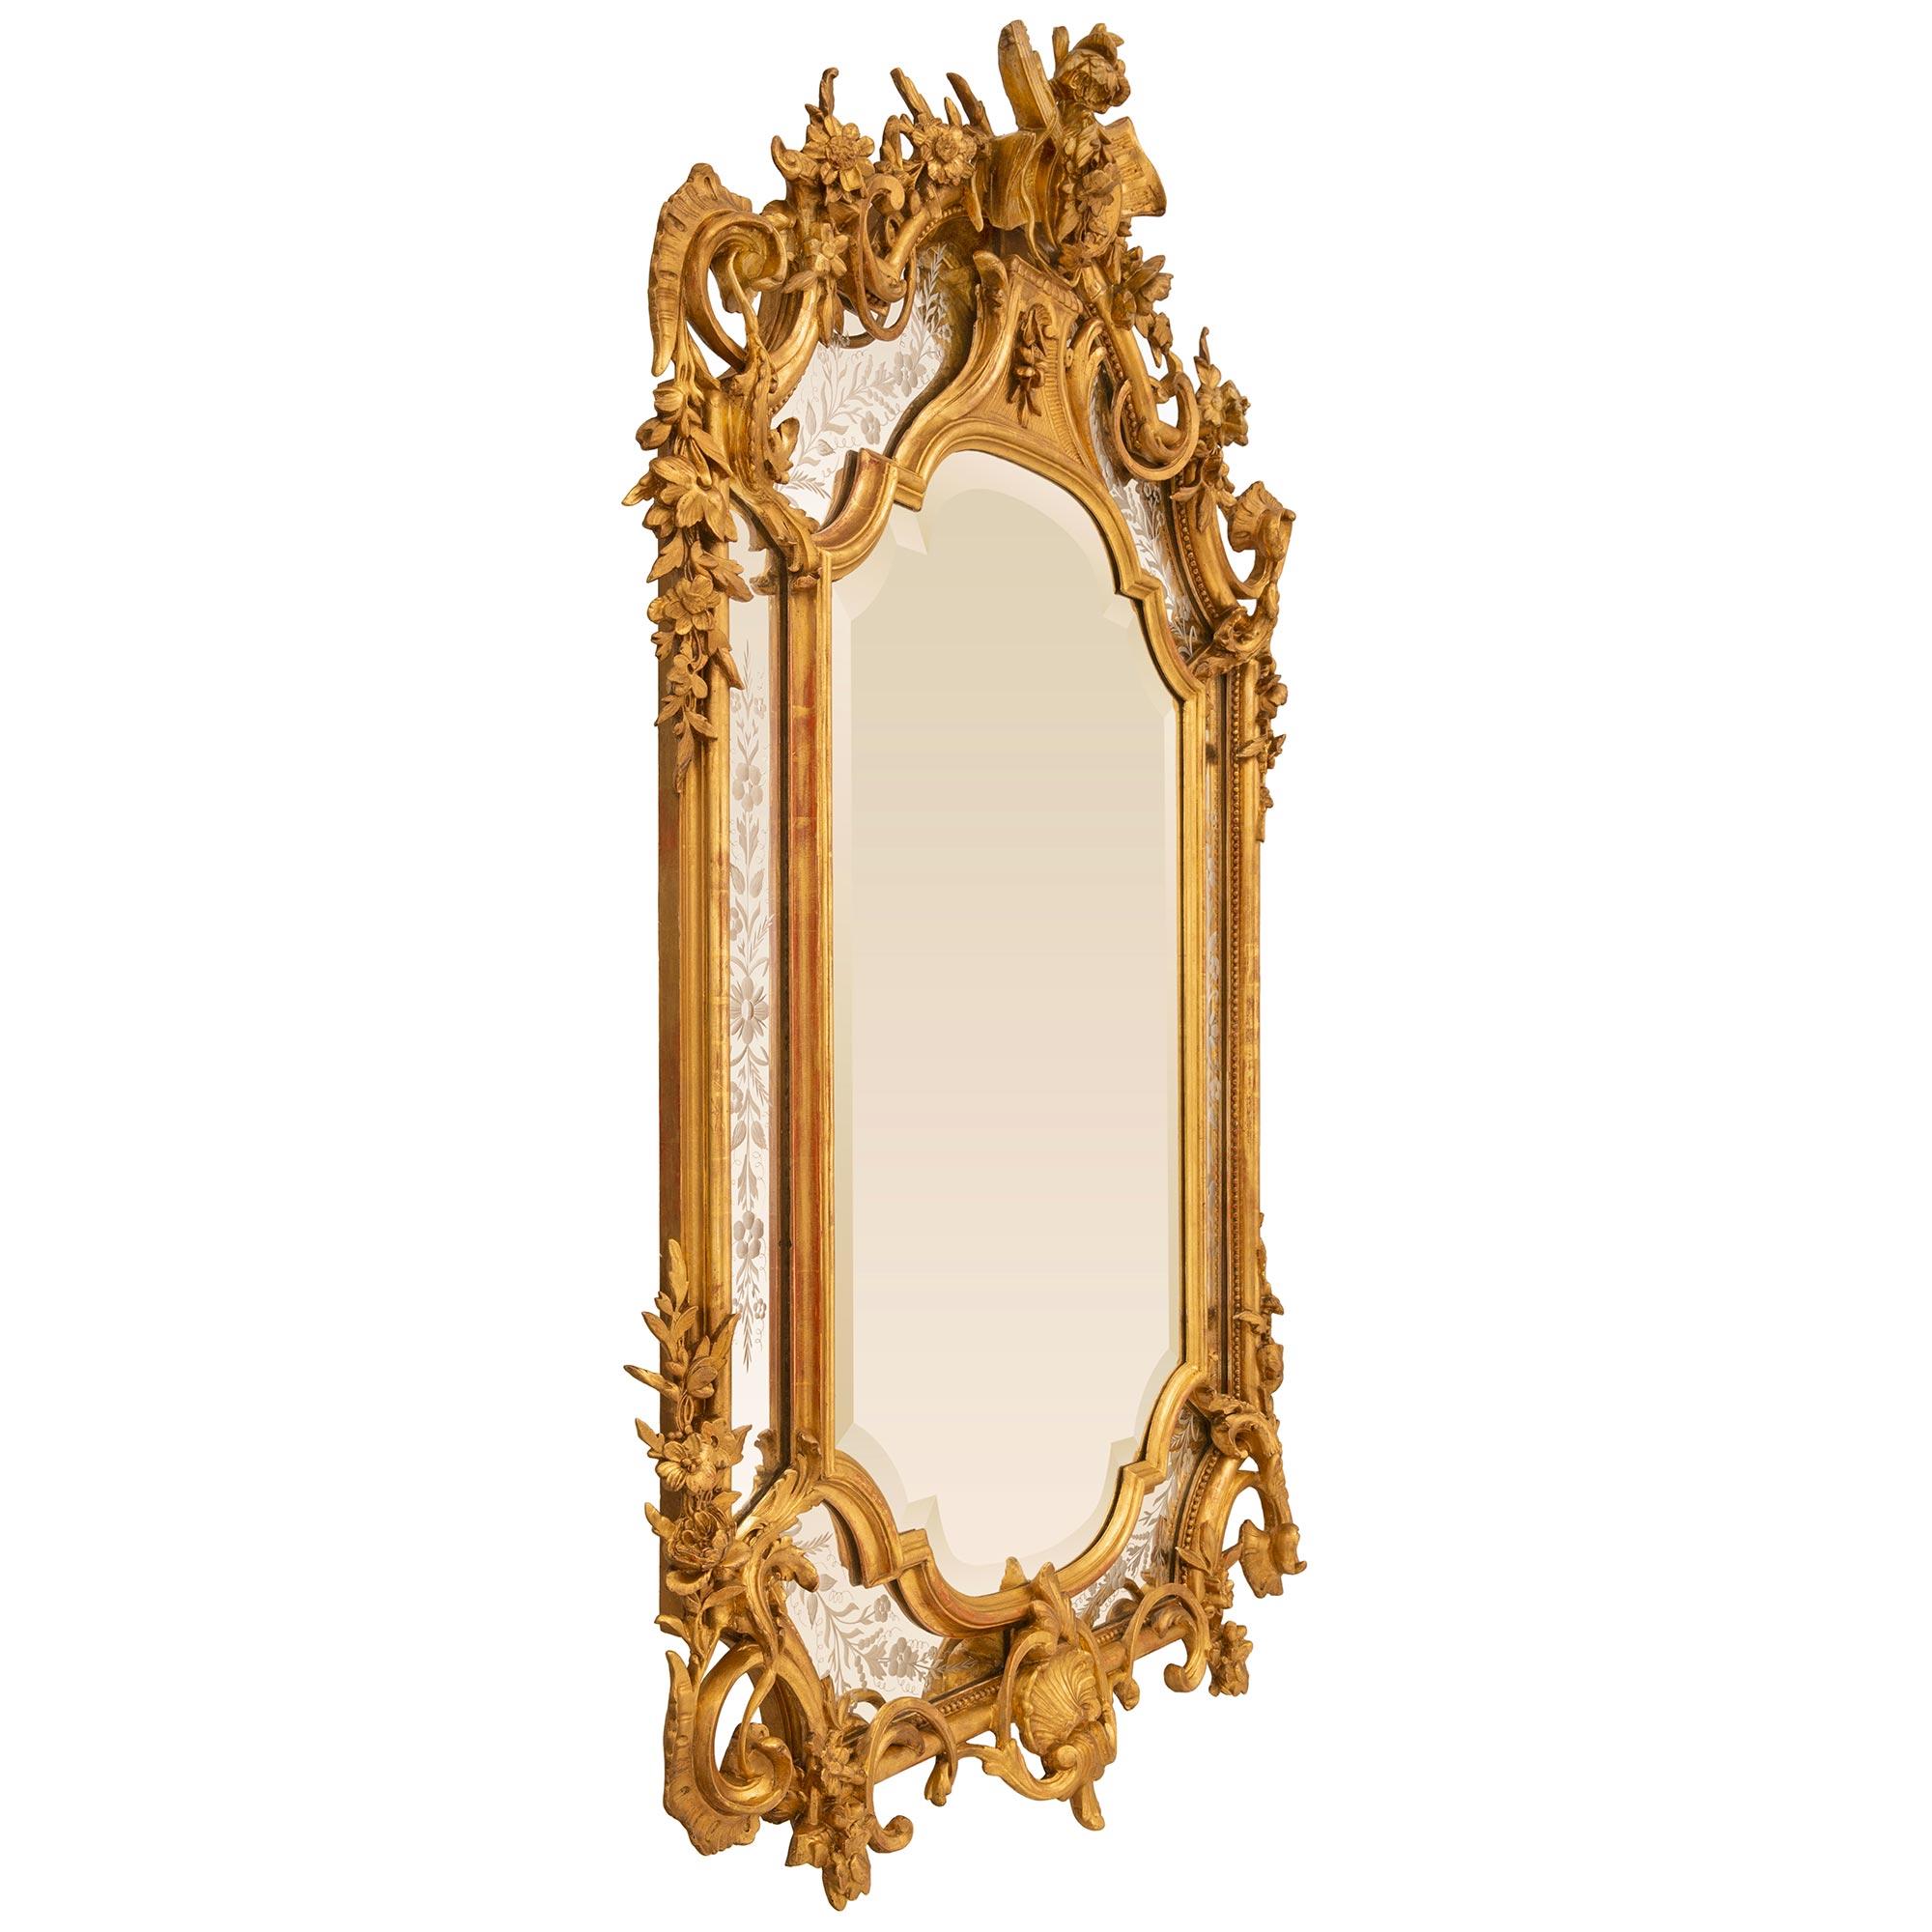 A most impressive and extremely elegant French 19th century Louis XVI st. Giltwood double frame mirror. The central mirror plate is surrounded by a mottled border while the outer mirror plates are richly decorated by etched designs of foliate and